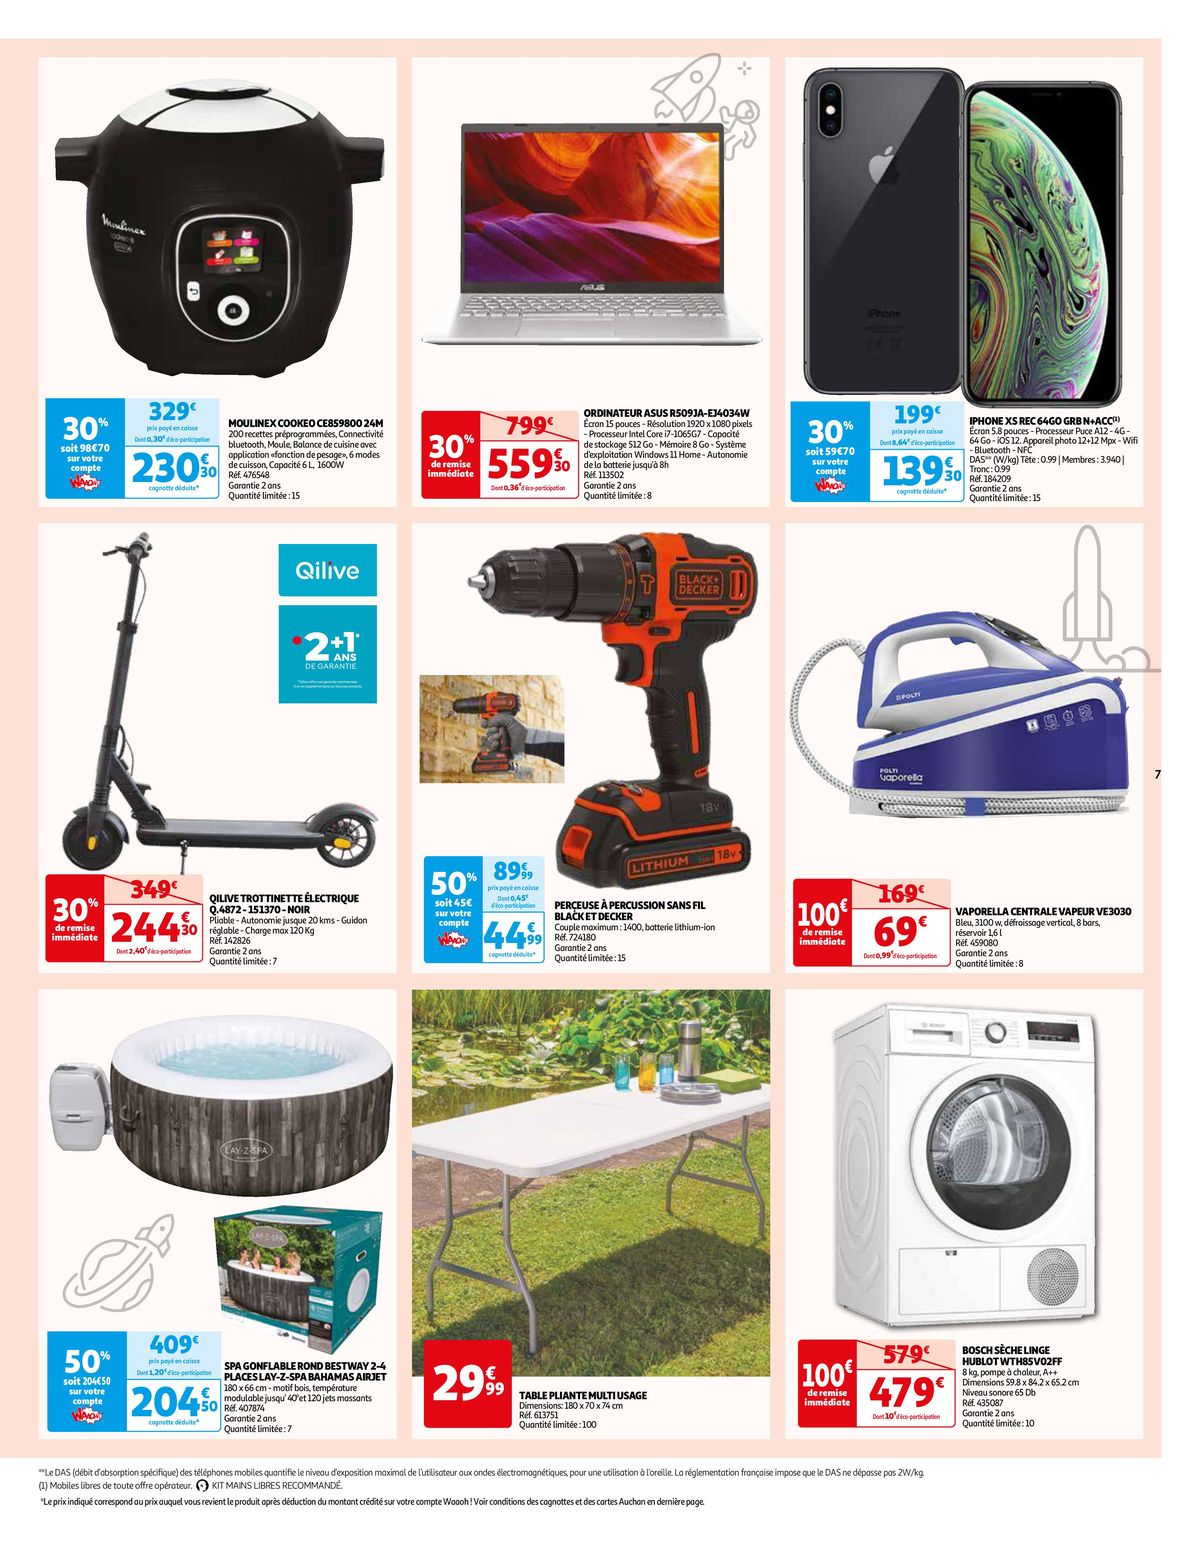 Catalogue Tract 6 jours incroyables Auchan Montivilliers, page 00007